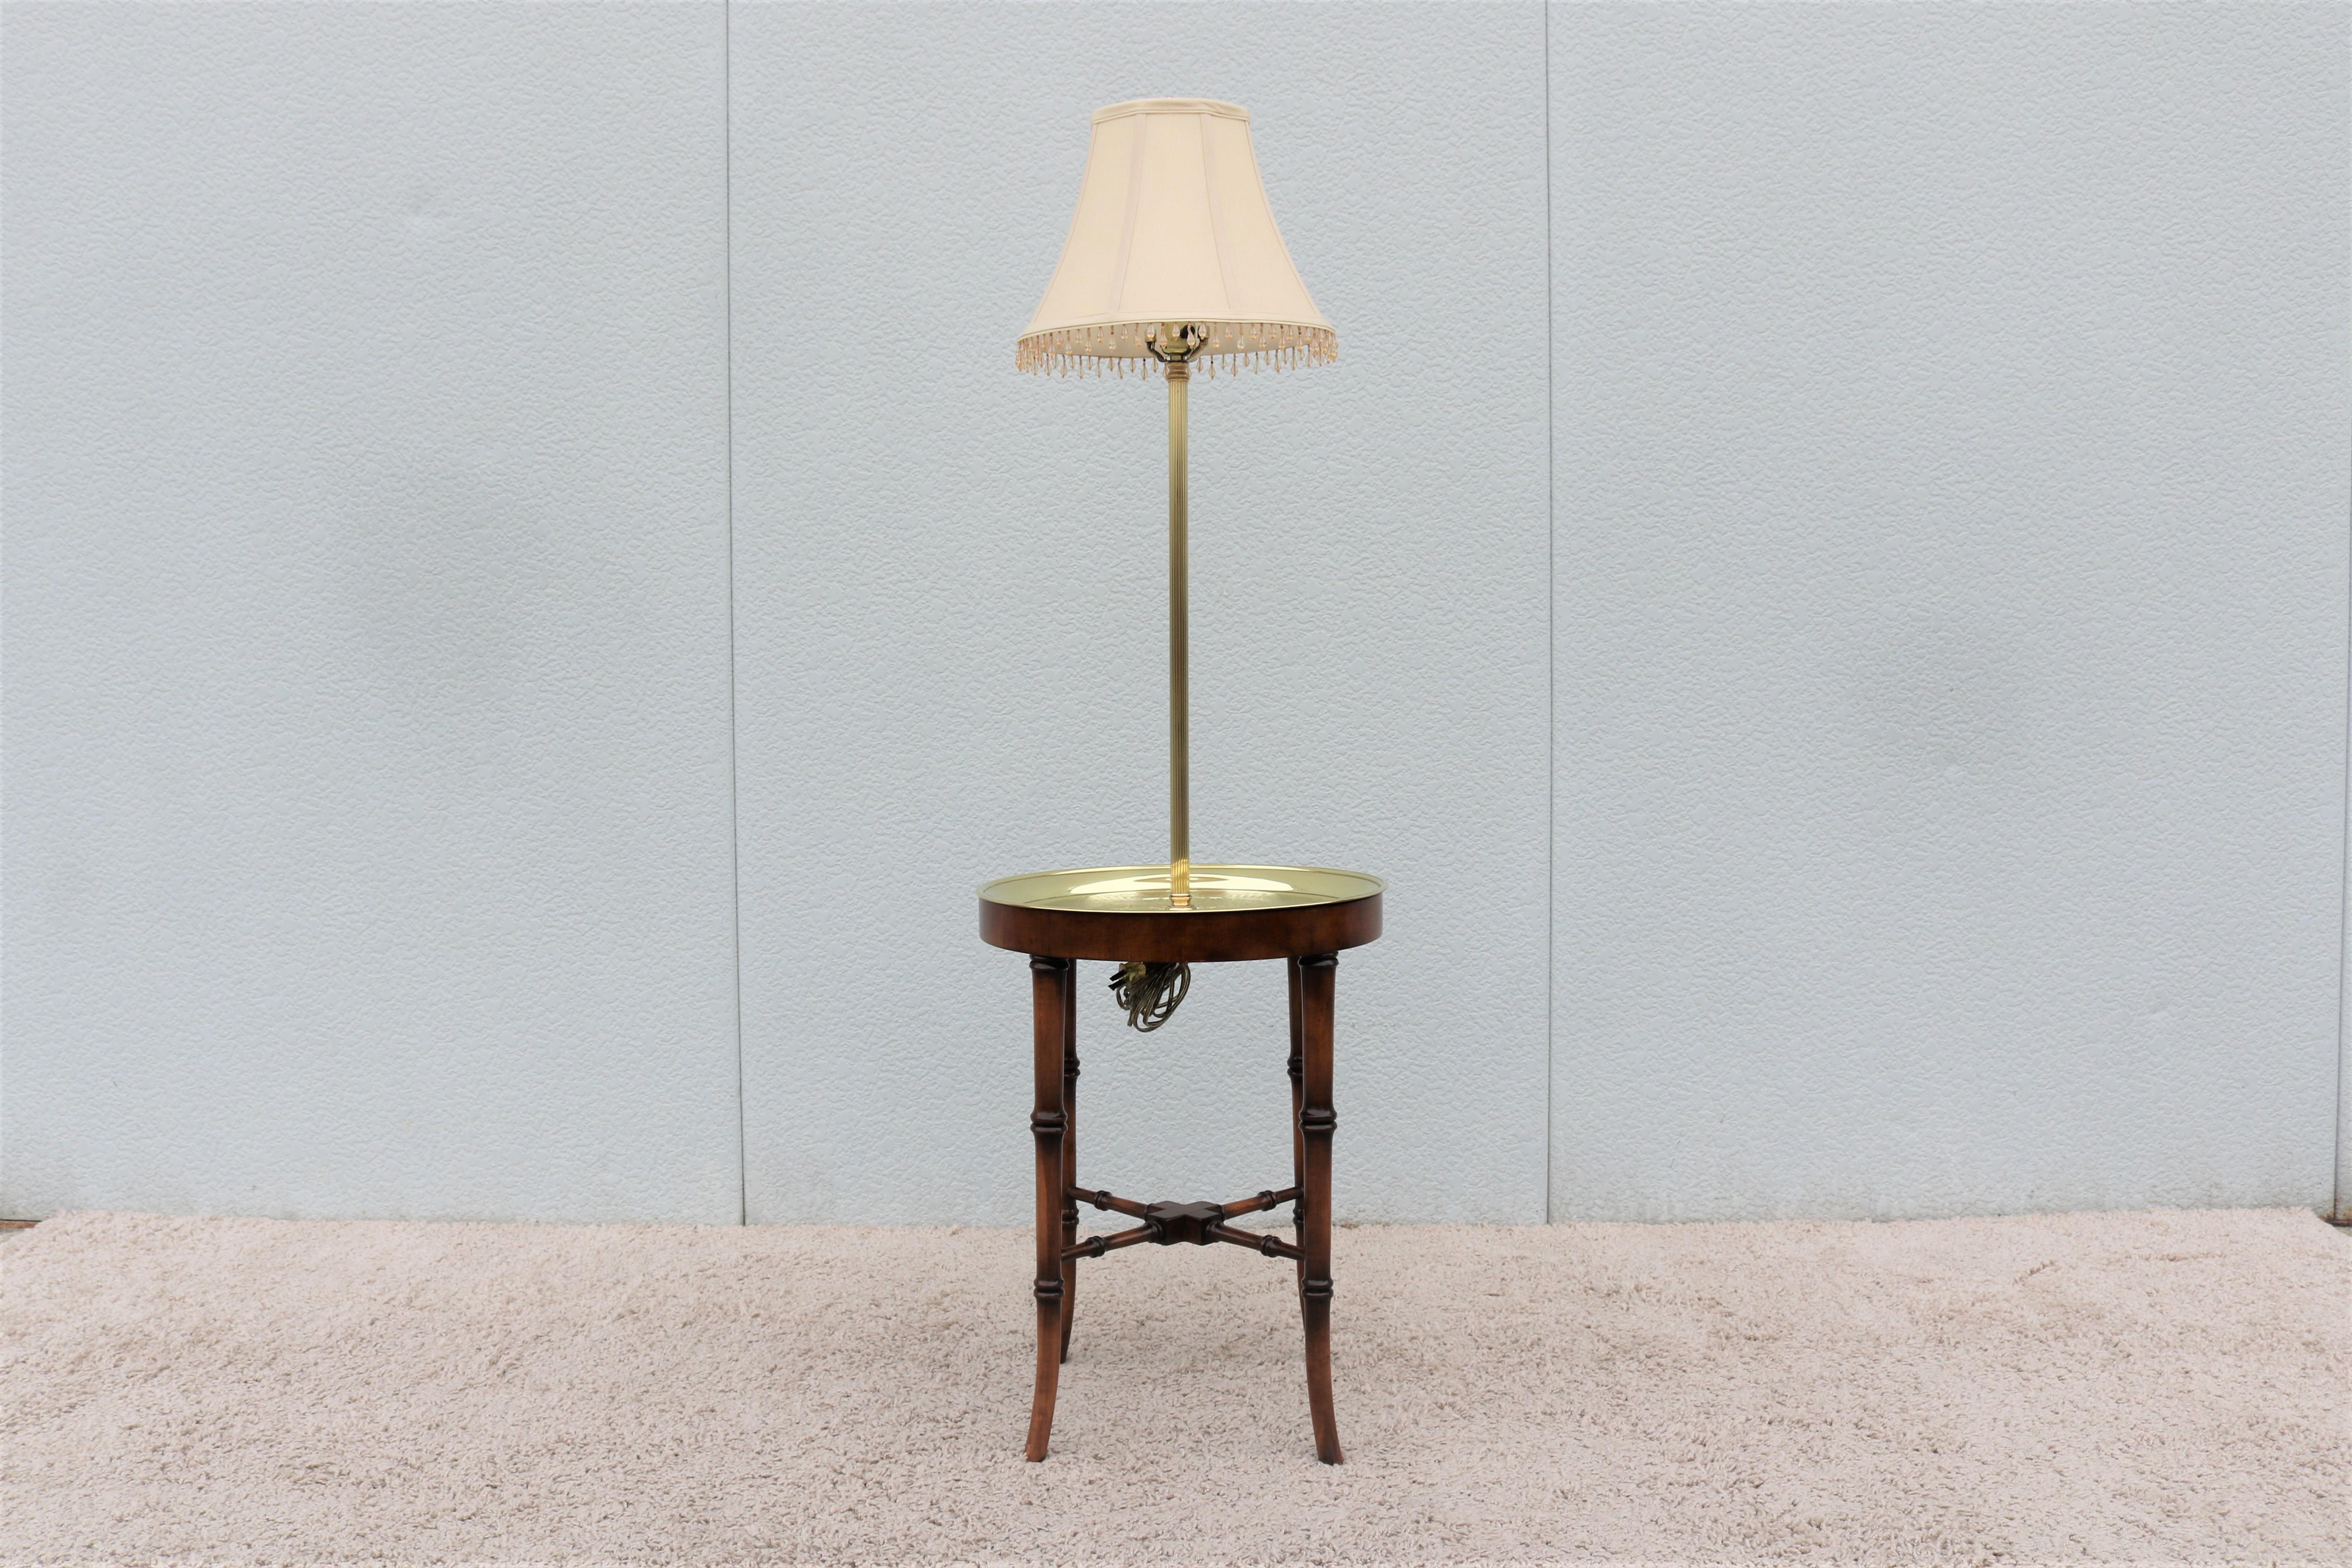 Fabulous vintage Regency style Frederick Cooper faux bamboo wood and etched brass tray side table floor lamp.
Features solid wood carved faux bamboo base having four legs conjoined with X stretcher and a superb etched solid brass tray.
Shade